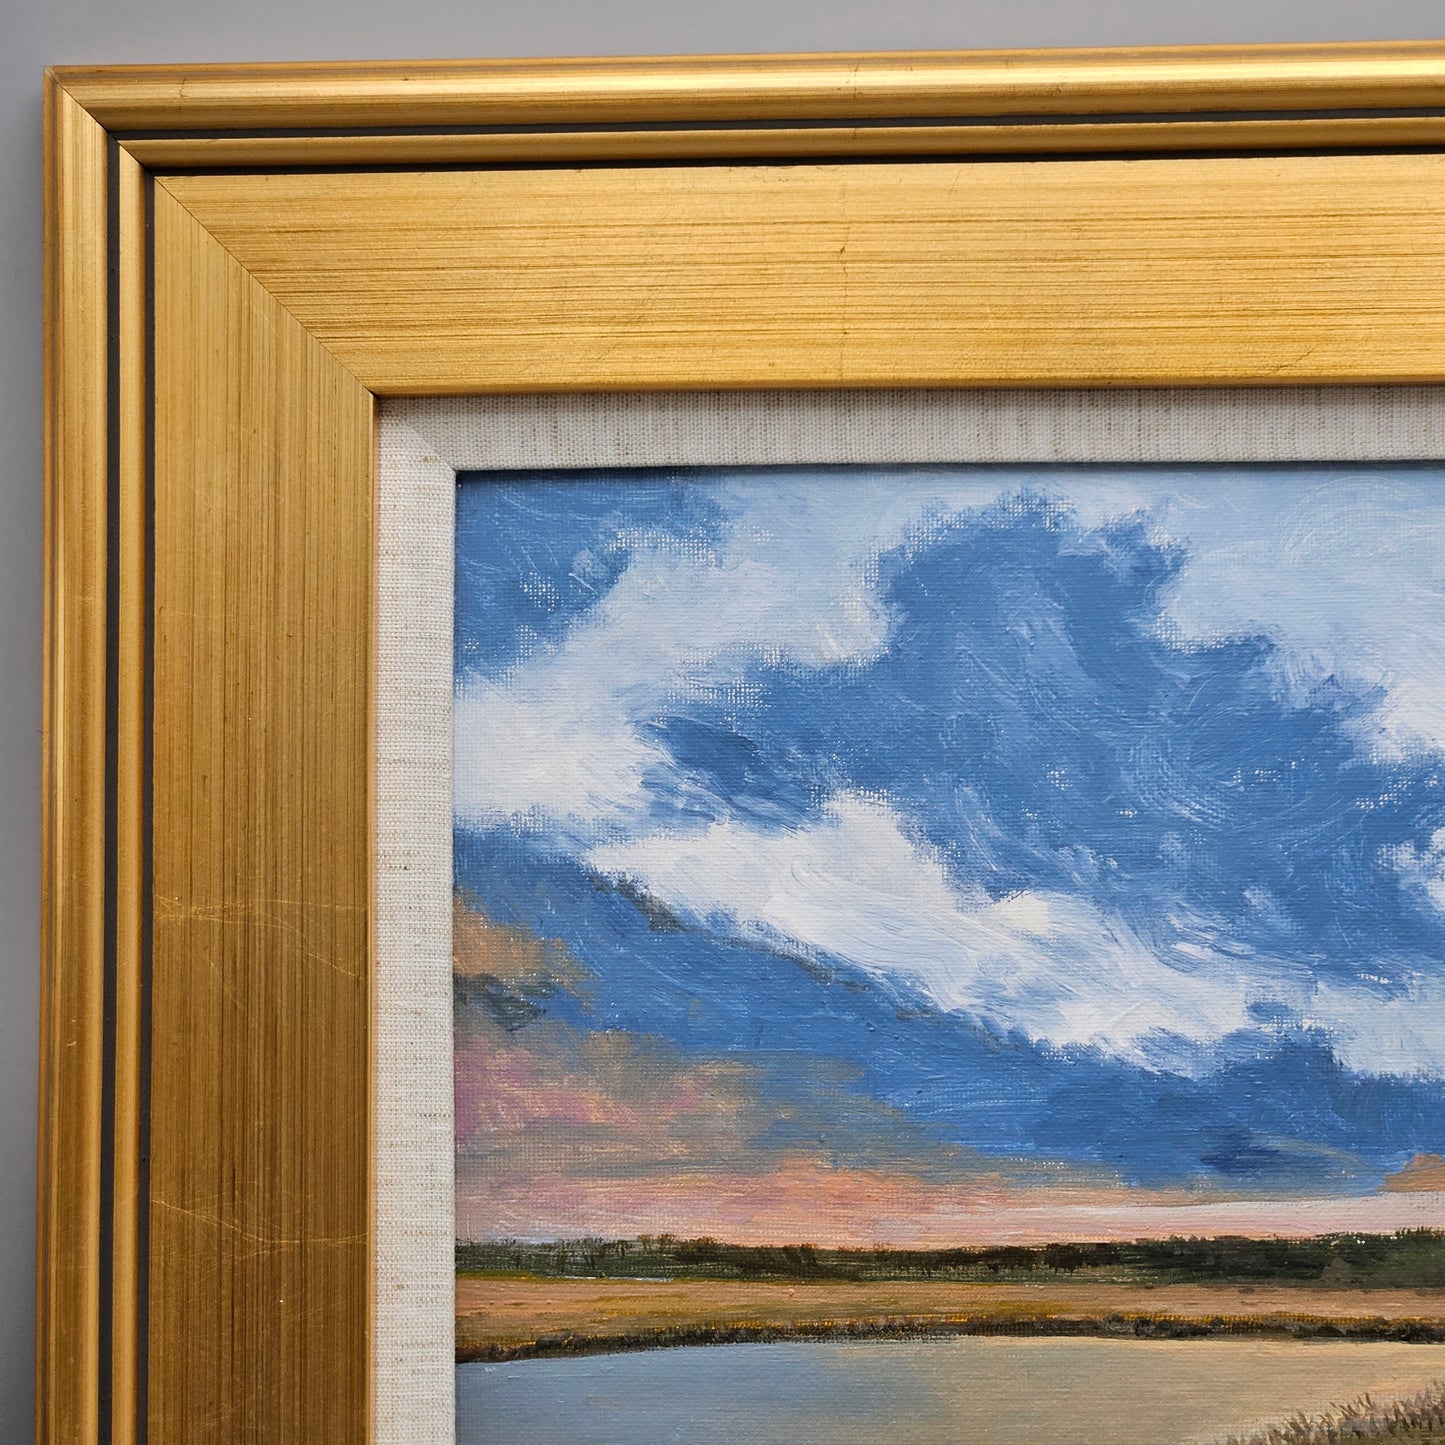 Decorative Oil Painting on Board of Sunset Scene in Gold Frame with Linen